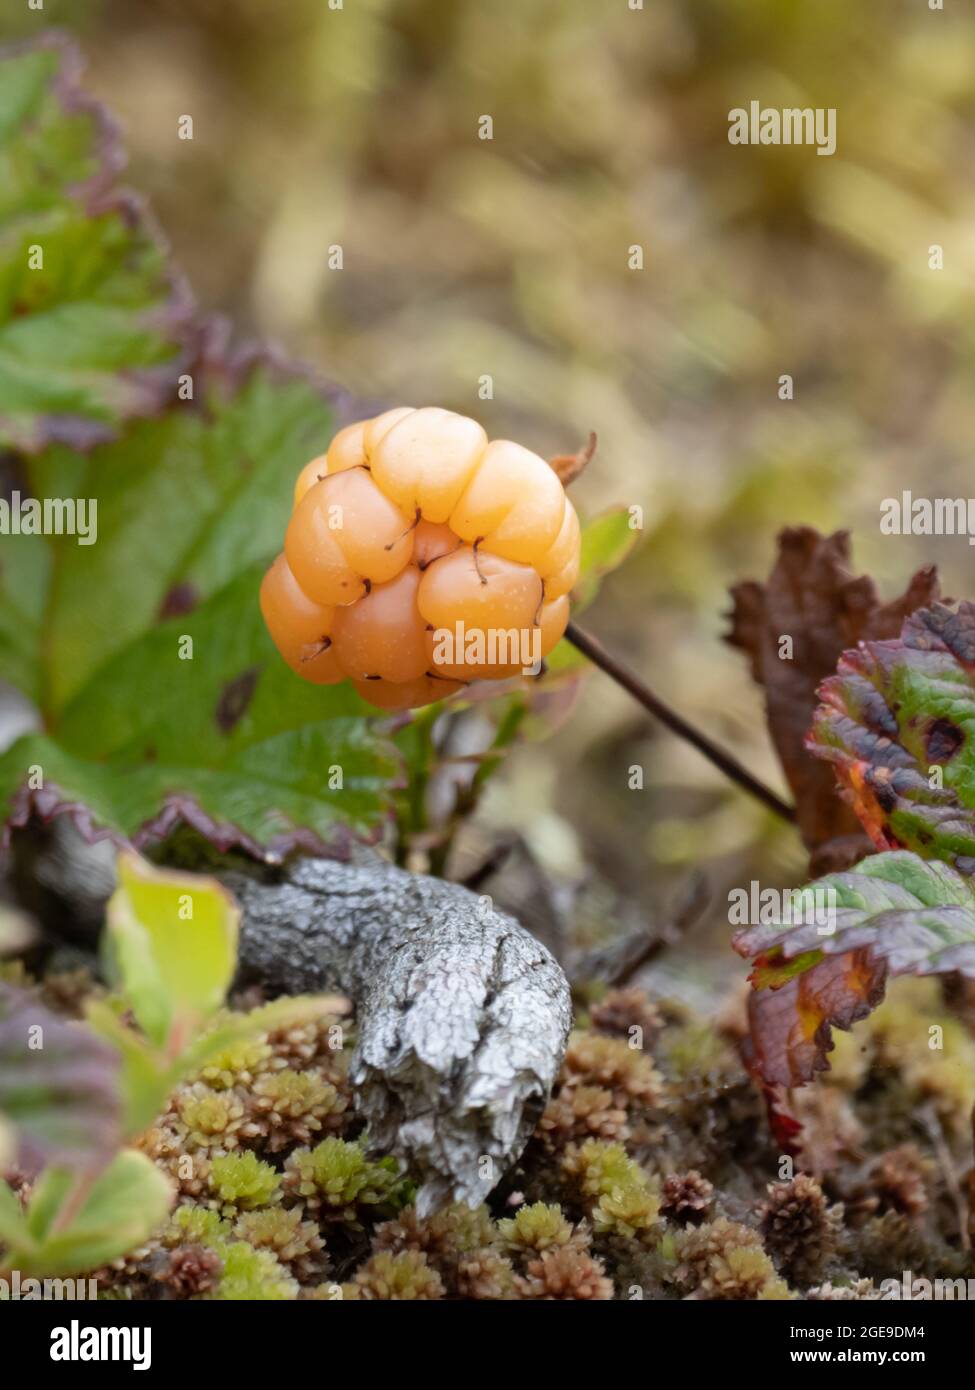 Rubus chamaemorus, common names include Cloudberry, Nordic Berry, Bakeapple, Knotberry, Knoutberry, Aqpik and Low-bush Salmonberry Stock Photo